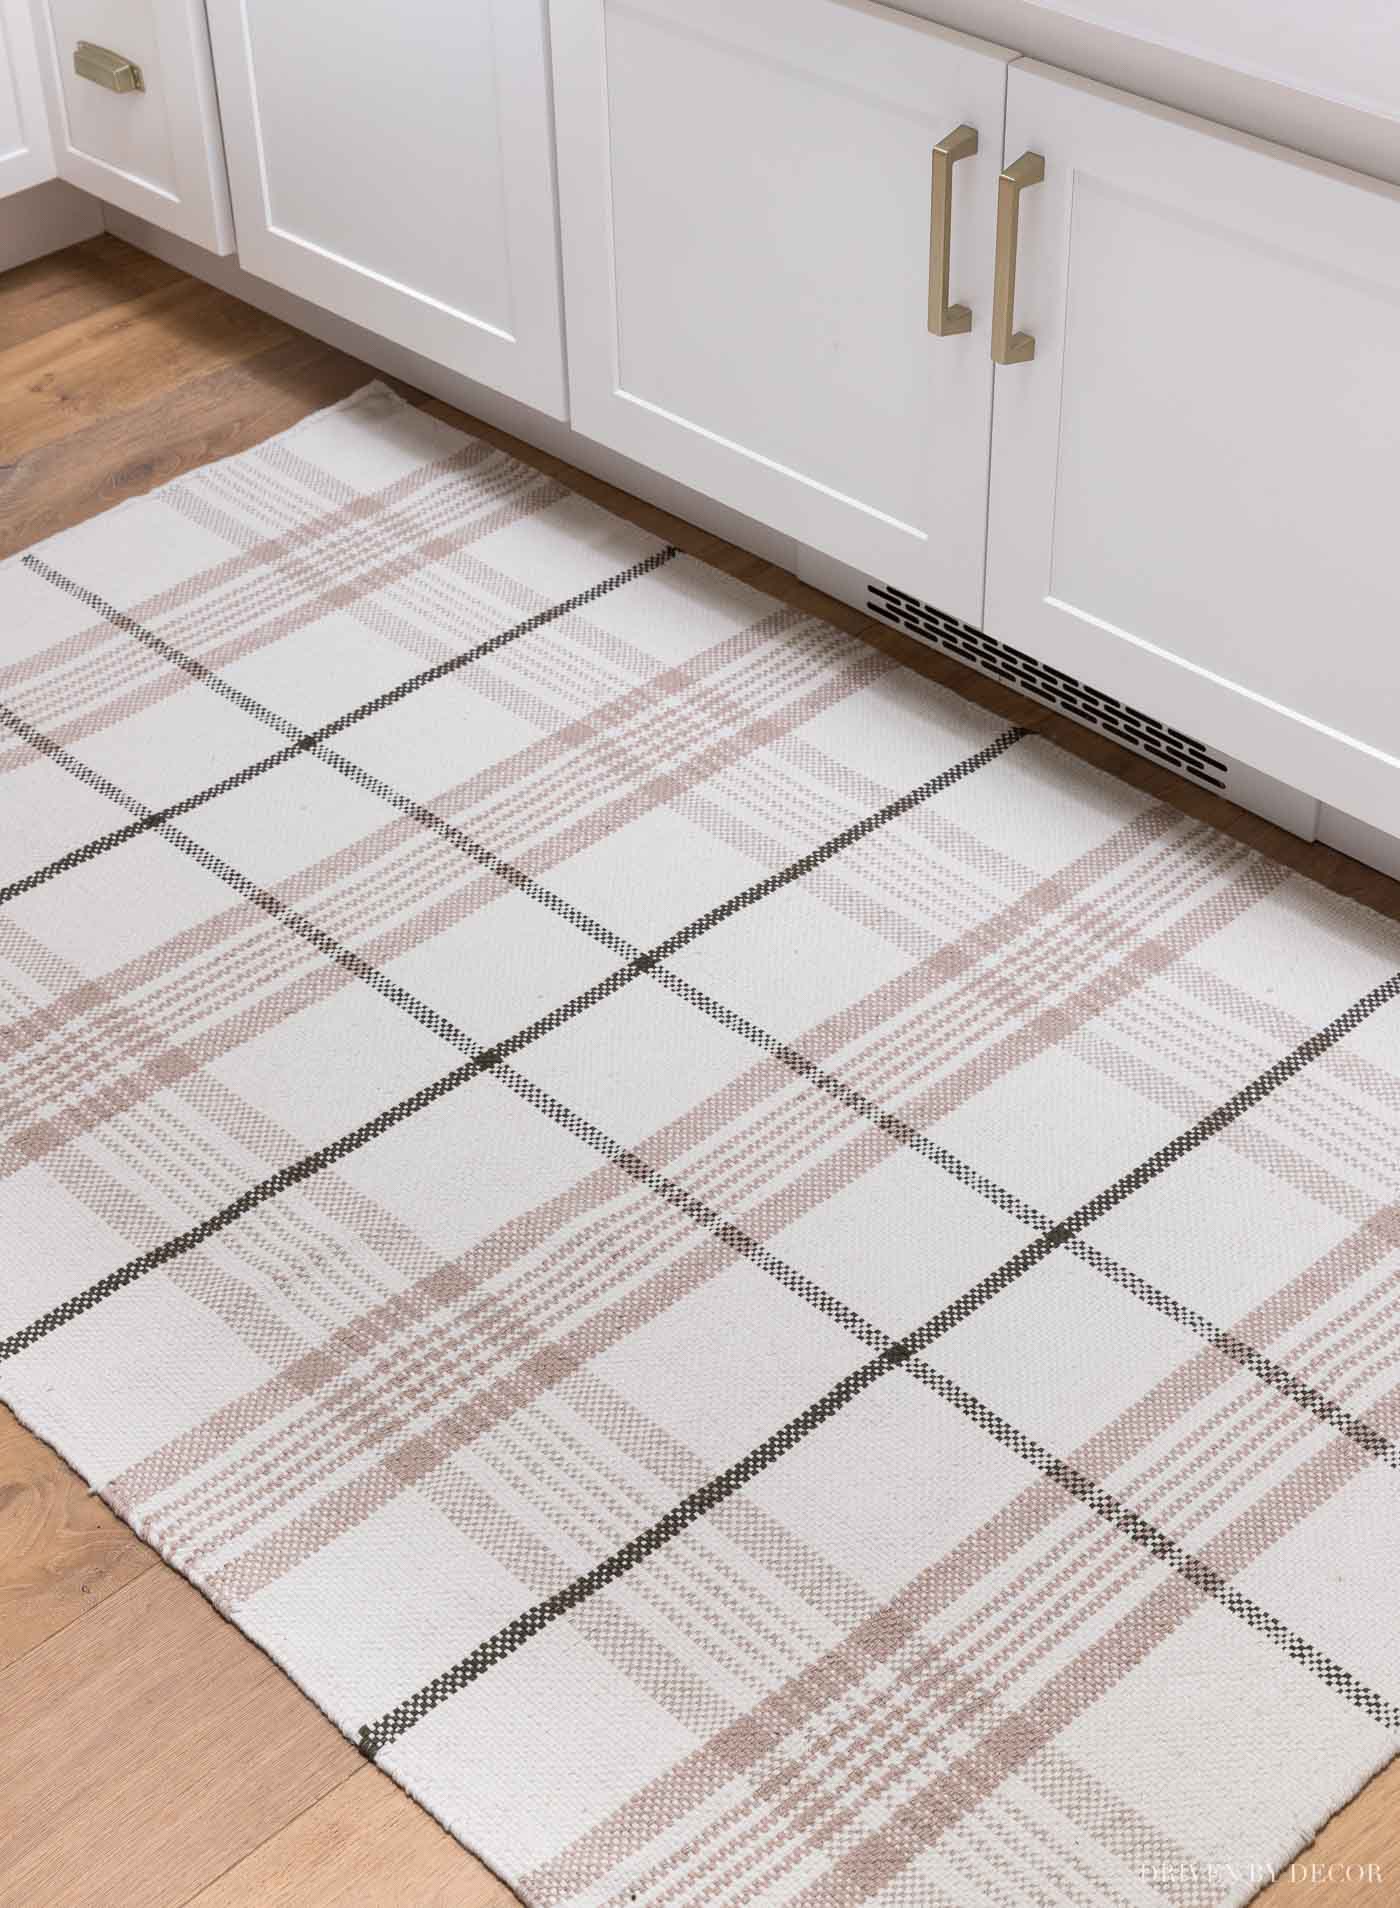 Gorgeous plaid rug for in front of our kitchen sink!